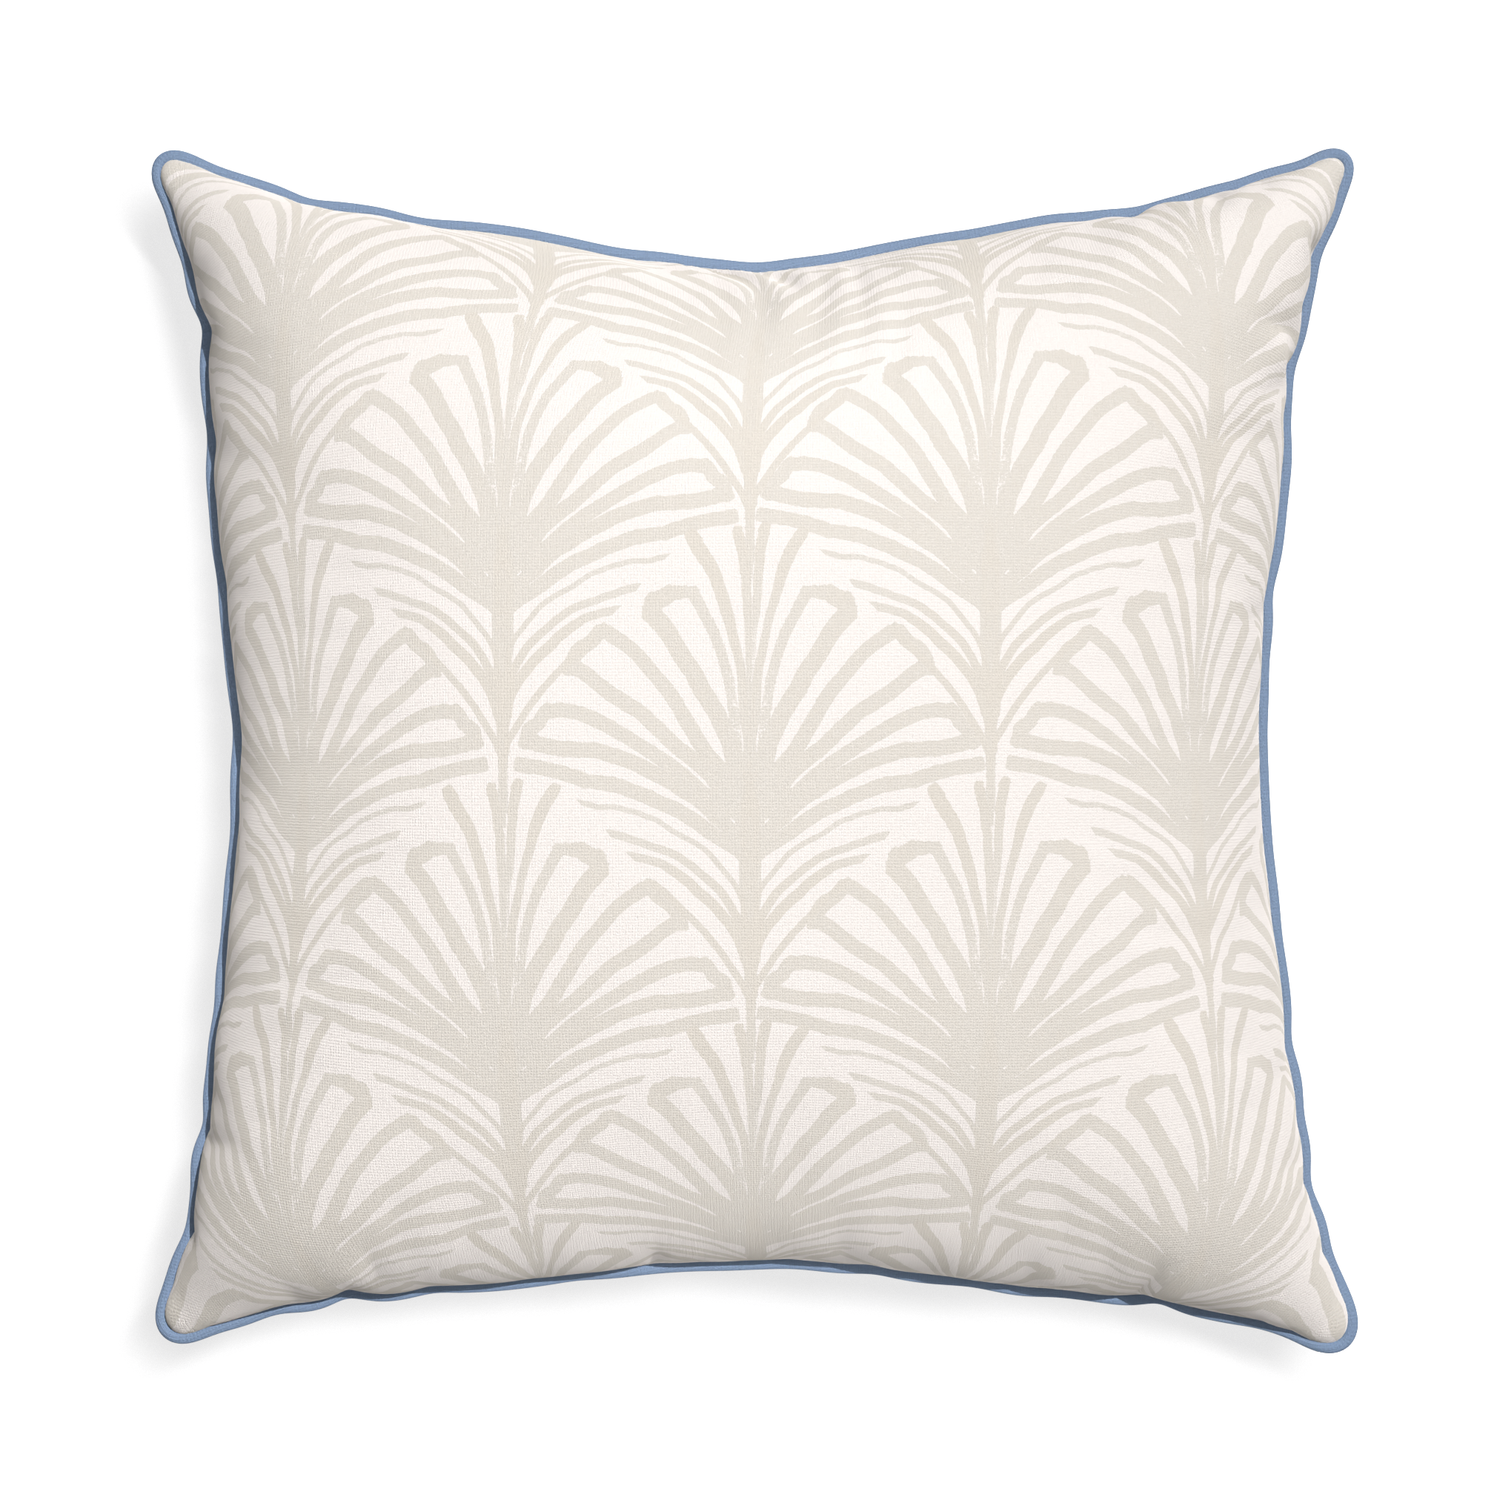 Euro-sham suzy sand custom pillow with sky piping on white background